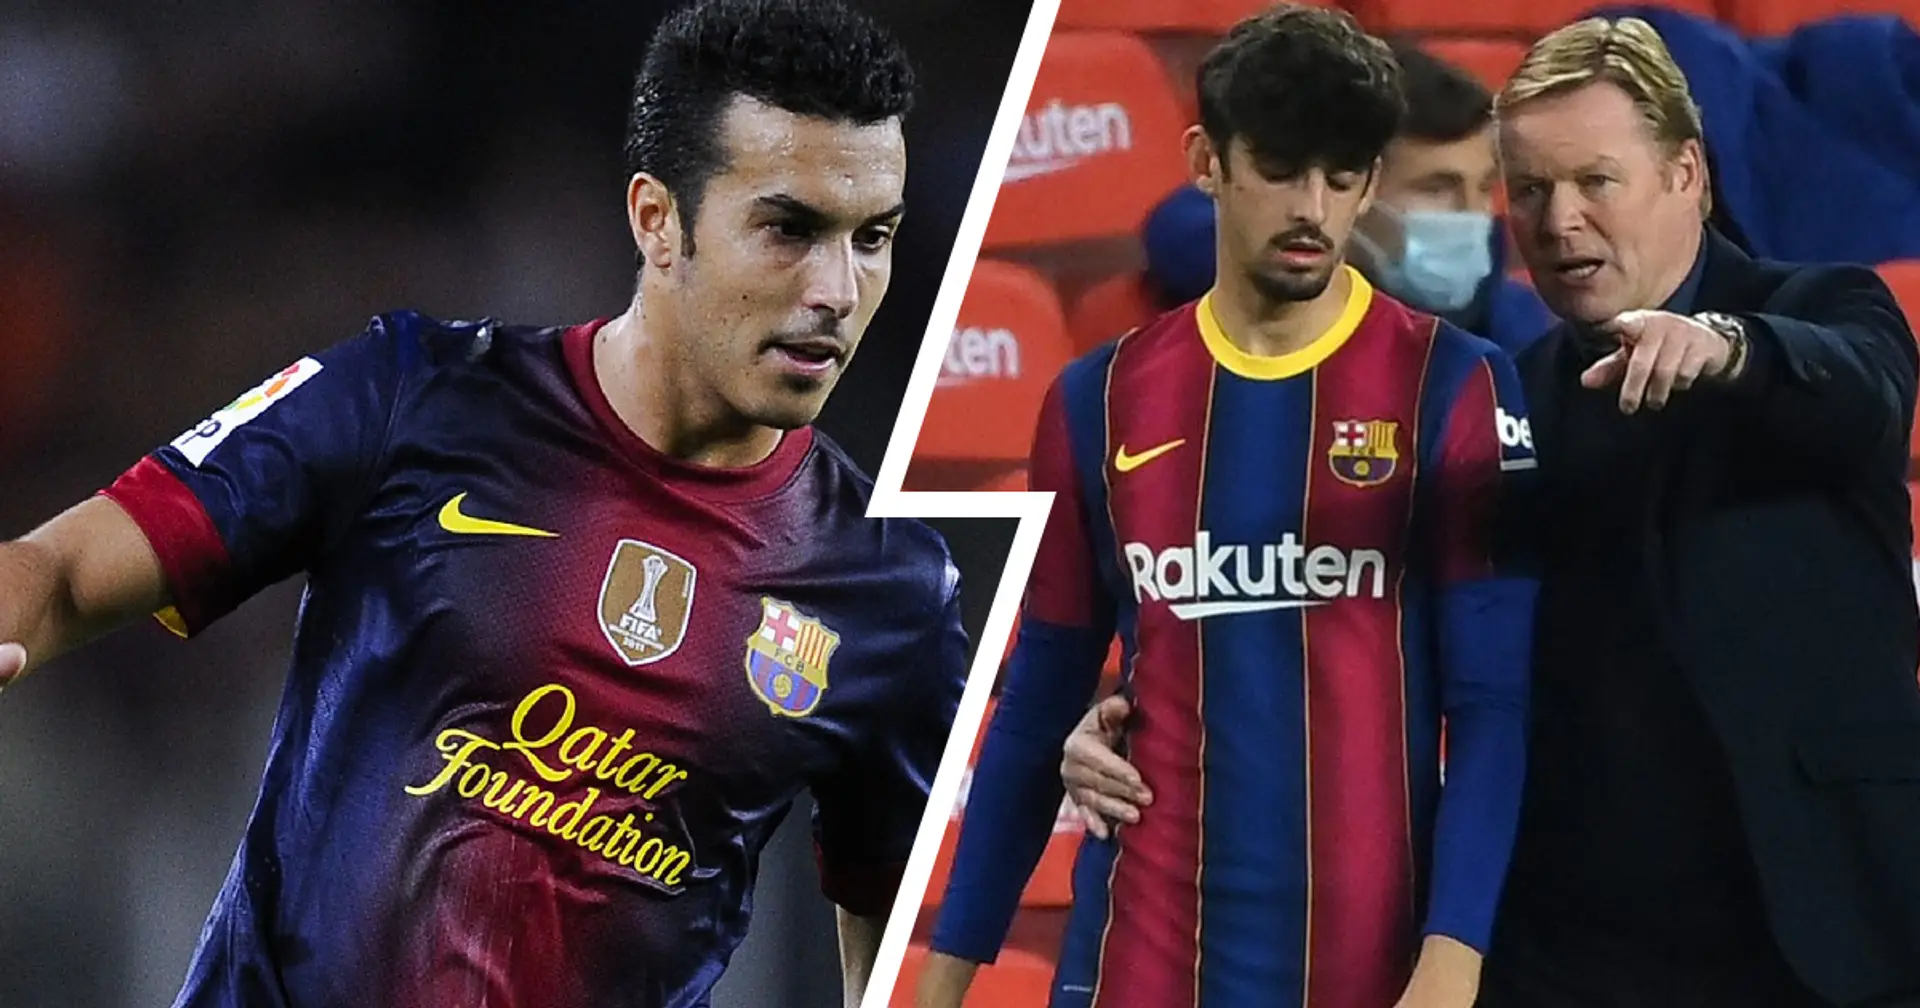 Most league games as a sub: Trincao shares substitute stat with Pedro